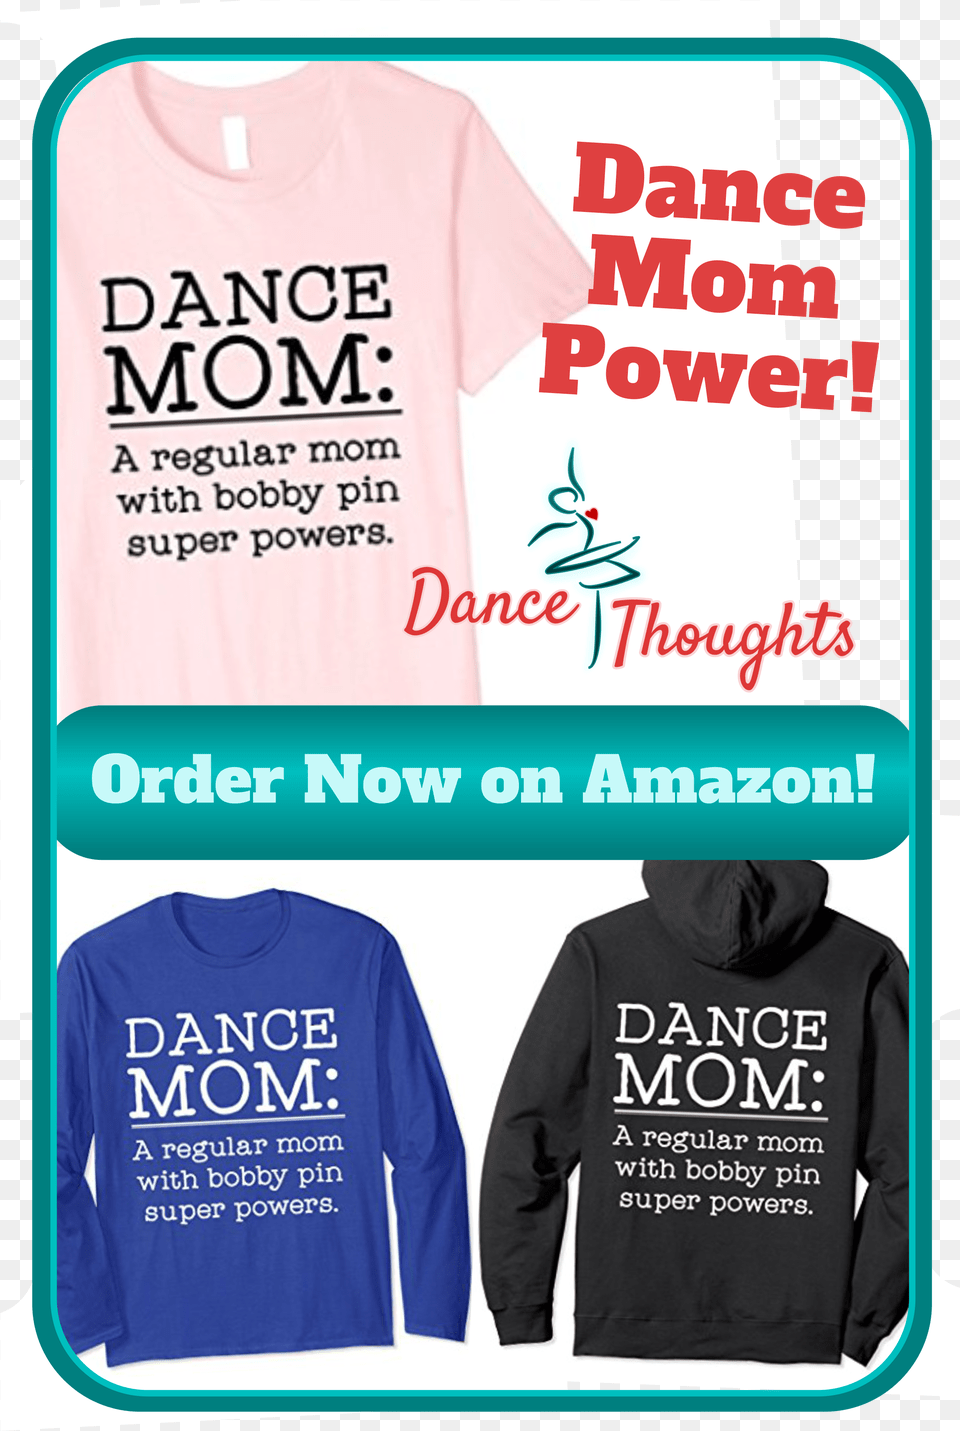 Dance Moms Have Many Super Powers And Can Work Magic Moj Maz Frajer Book, T-shirt, Clothing, Coat, Jacket Png